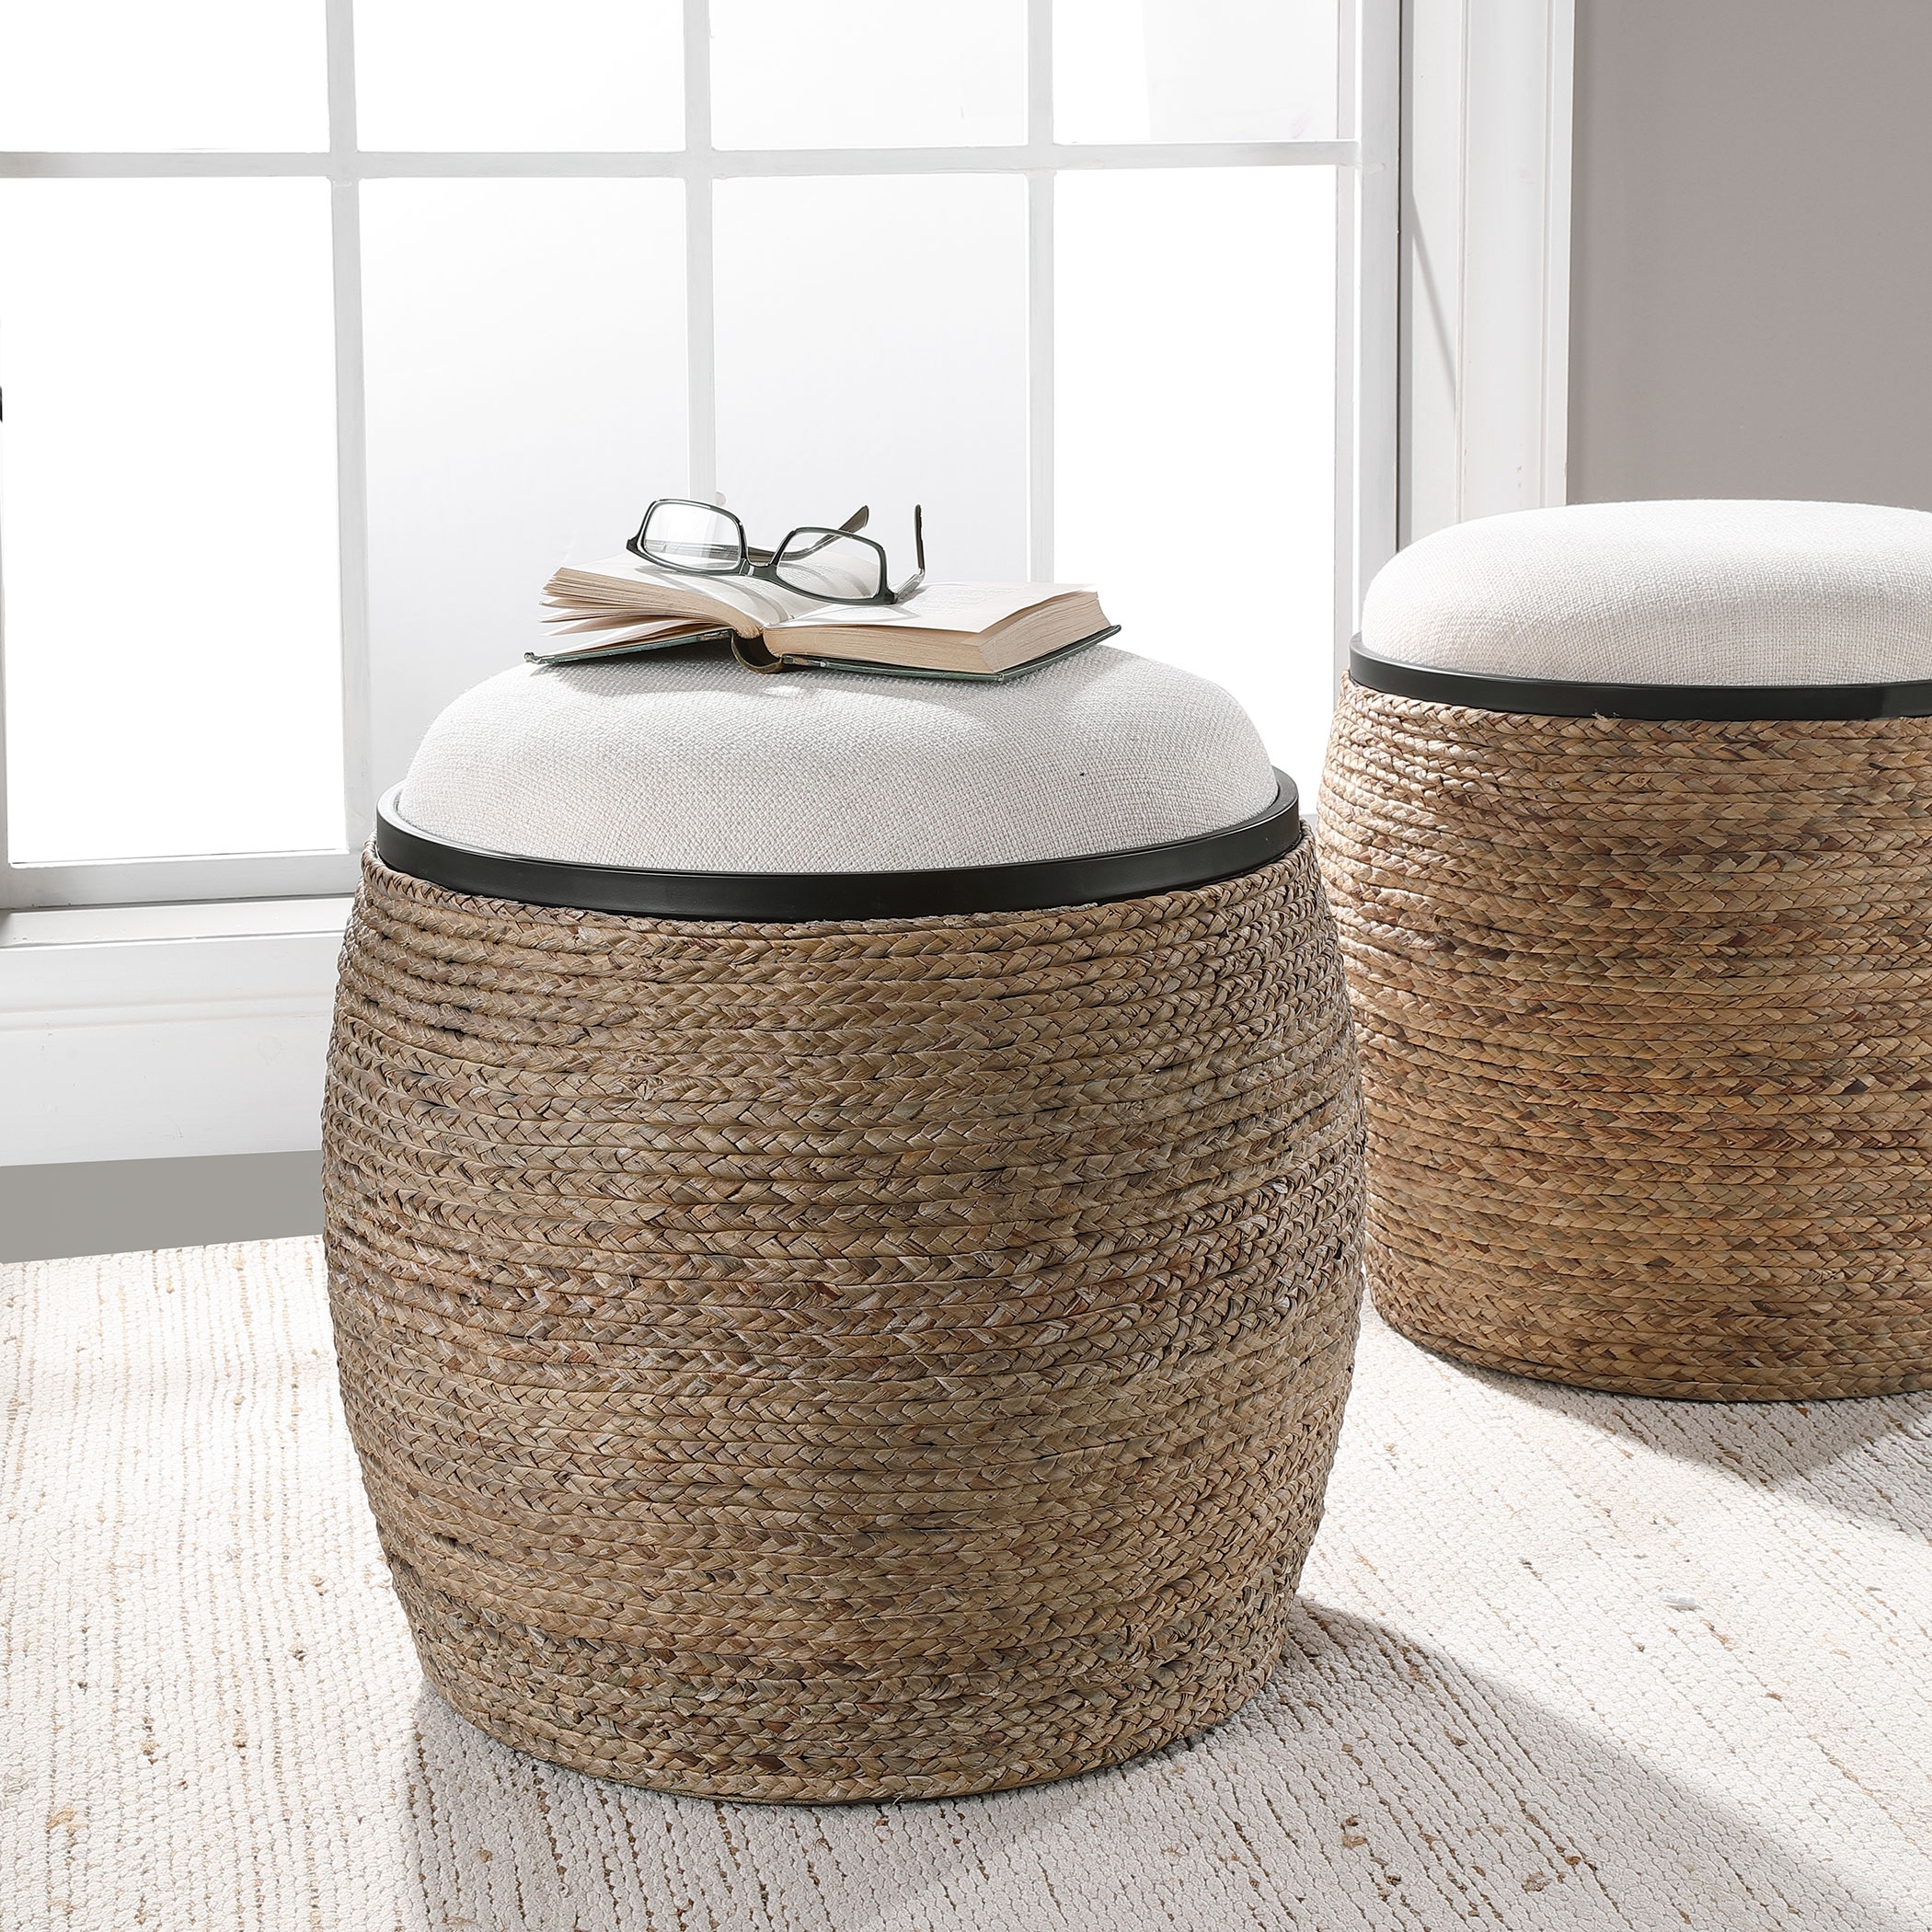 Tristian Accent Stool - Image 1